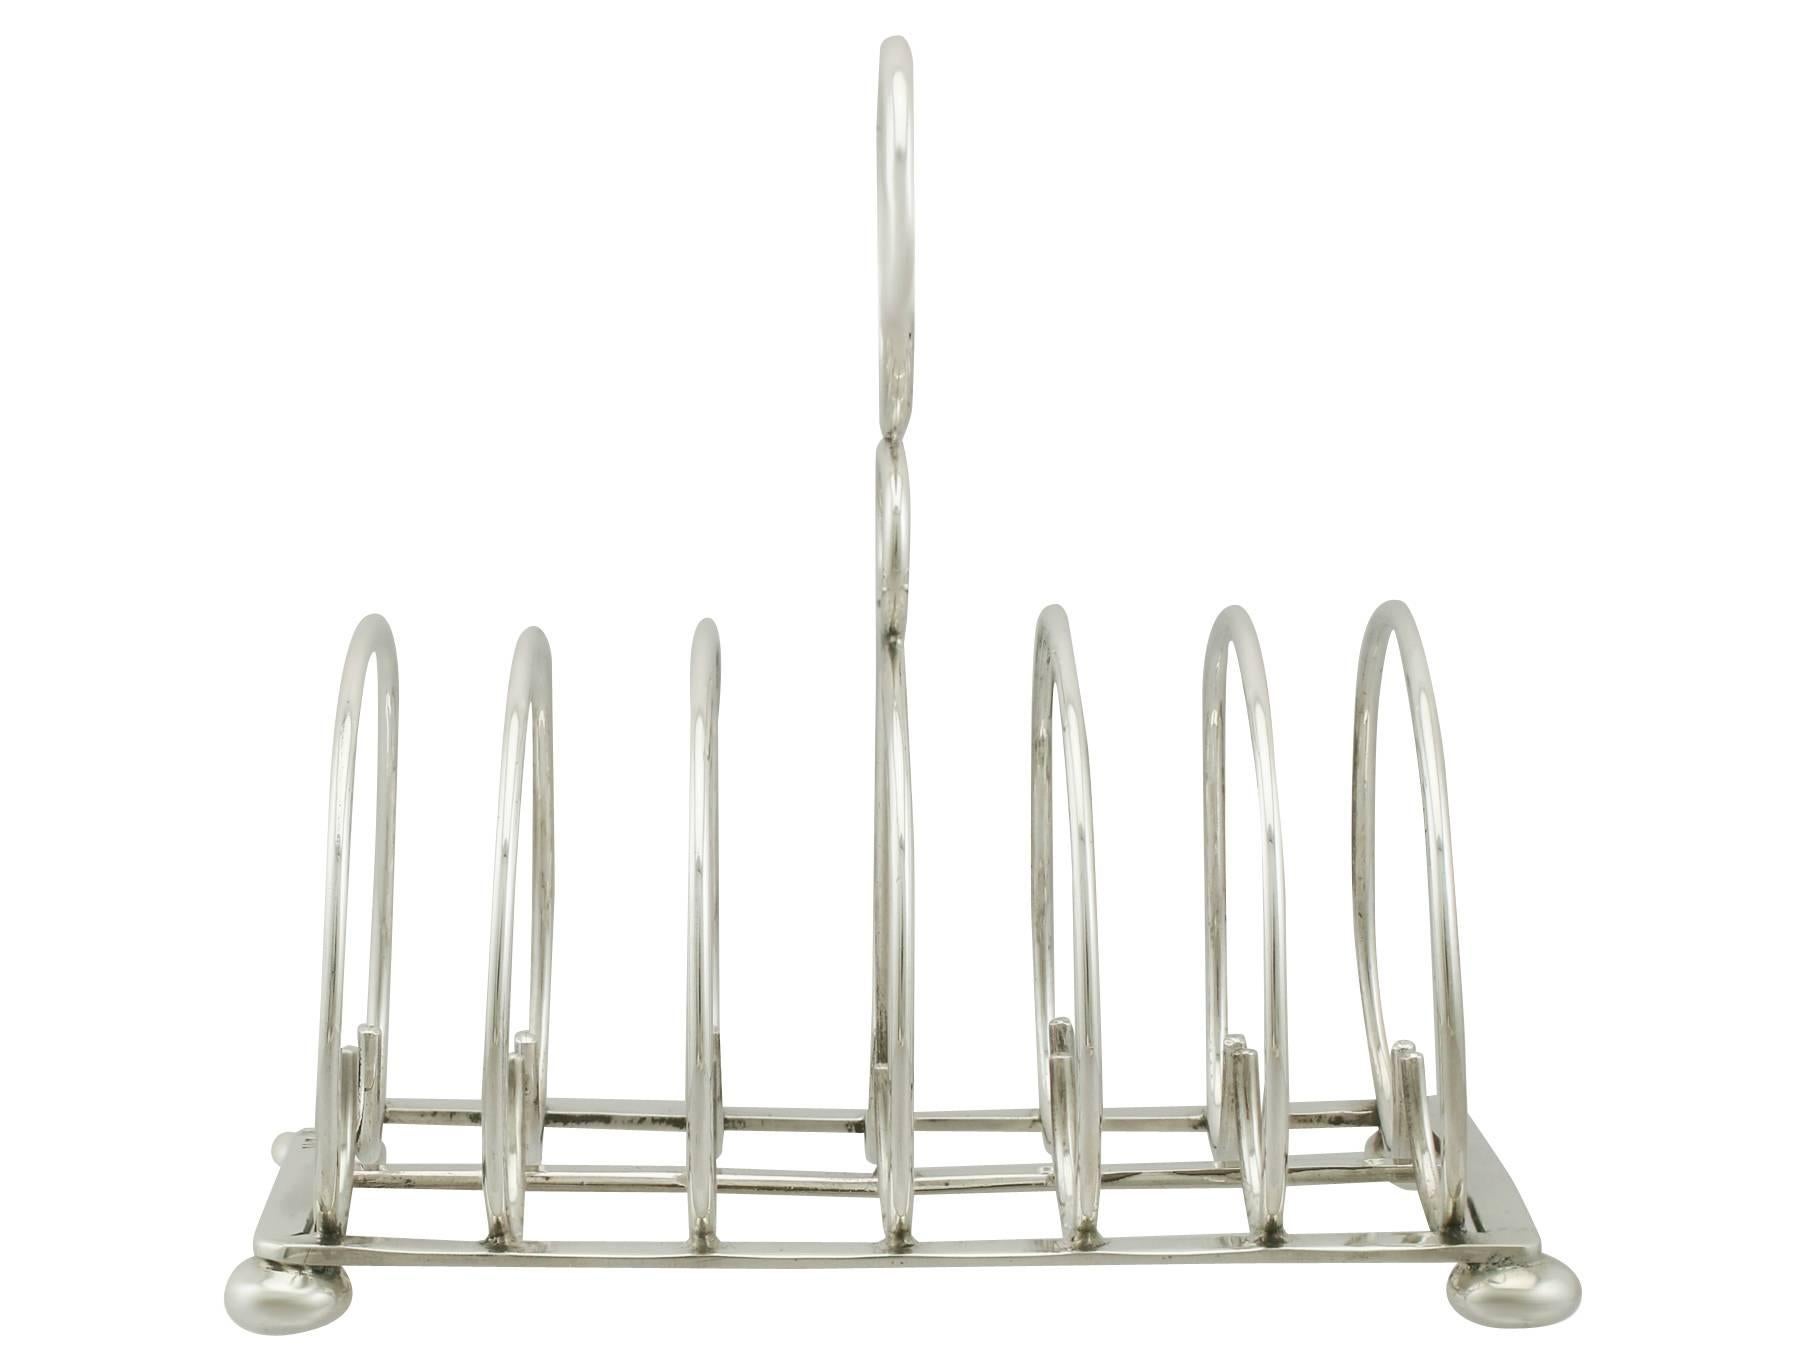 A fine and impressive antique Edwardian English sterling silver toast/letter rack; an addition to our dining silverware collection.

This exceptional antique Edwardian sterling silver toast / letter rack has a rounded form.

This antique silver